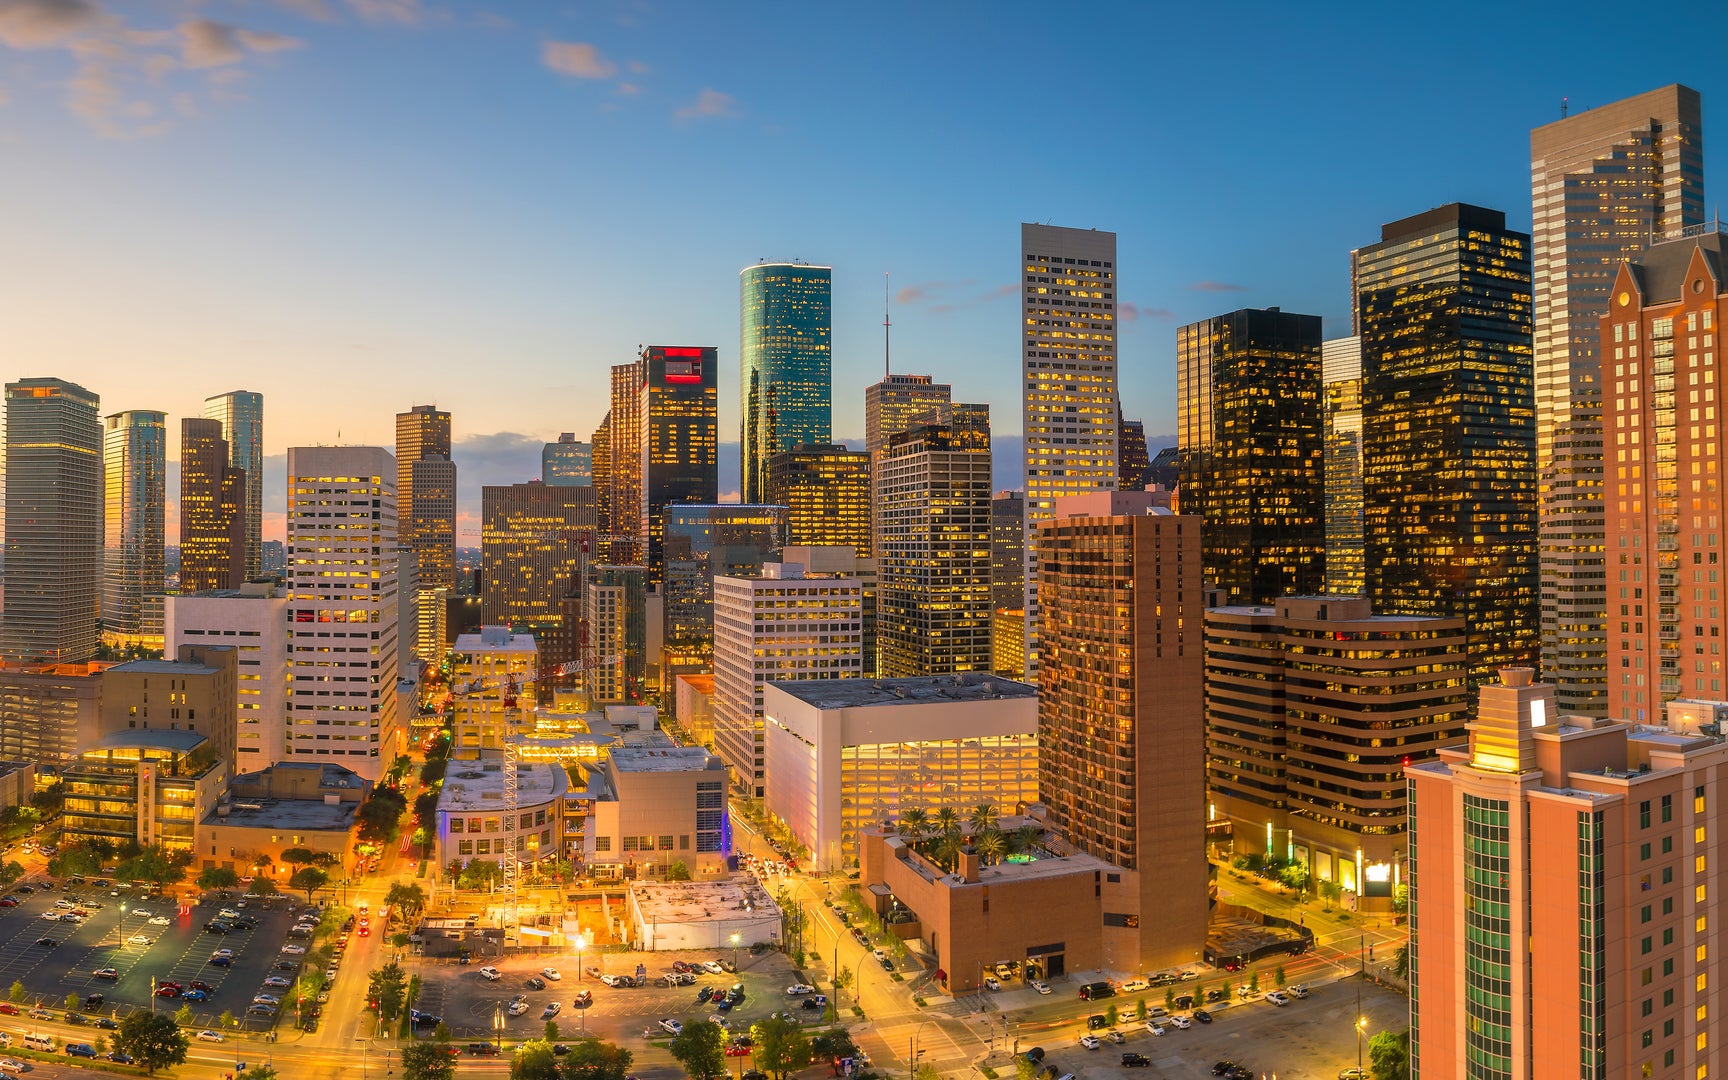 Panoramic view of the Houston, TX skyline at dusk.